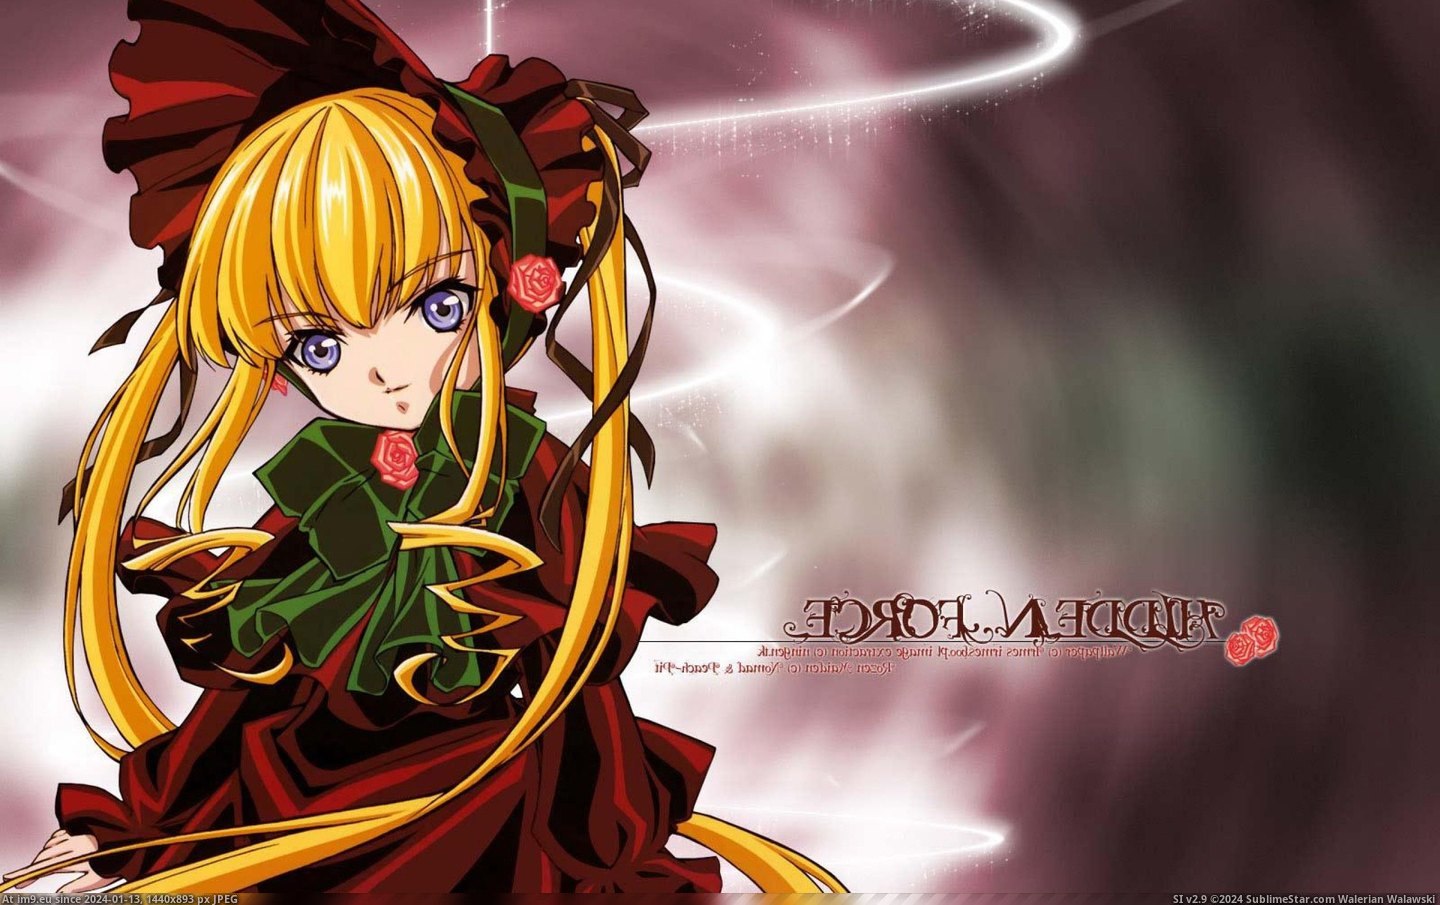 Rozen Maiden Hd Wallpaper 22(25) (HD) (in HD Wallpapers - anime, games and abstract art/3D backgrounds)